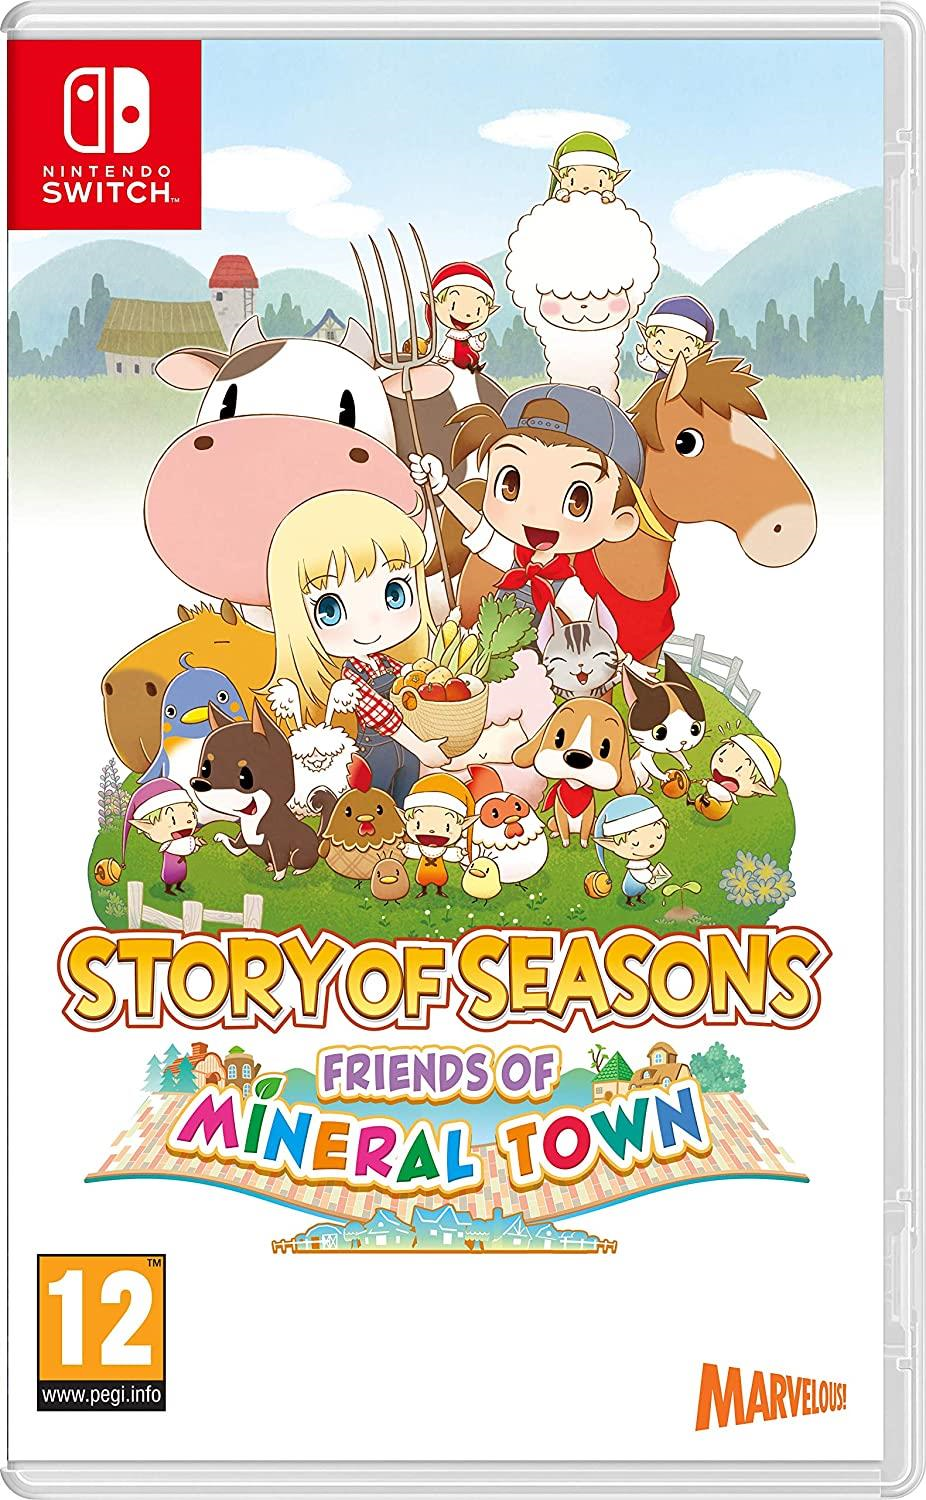 Story of Seasons: Friends Of Mineral Town, Marvelous